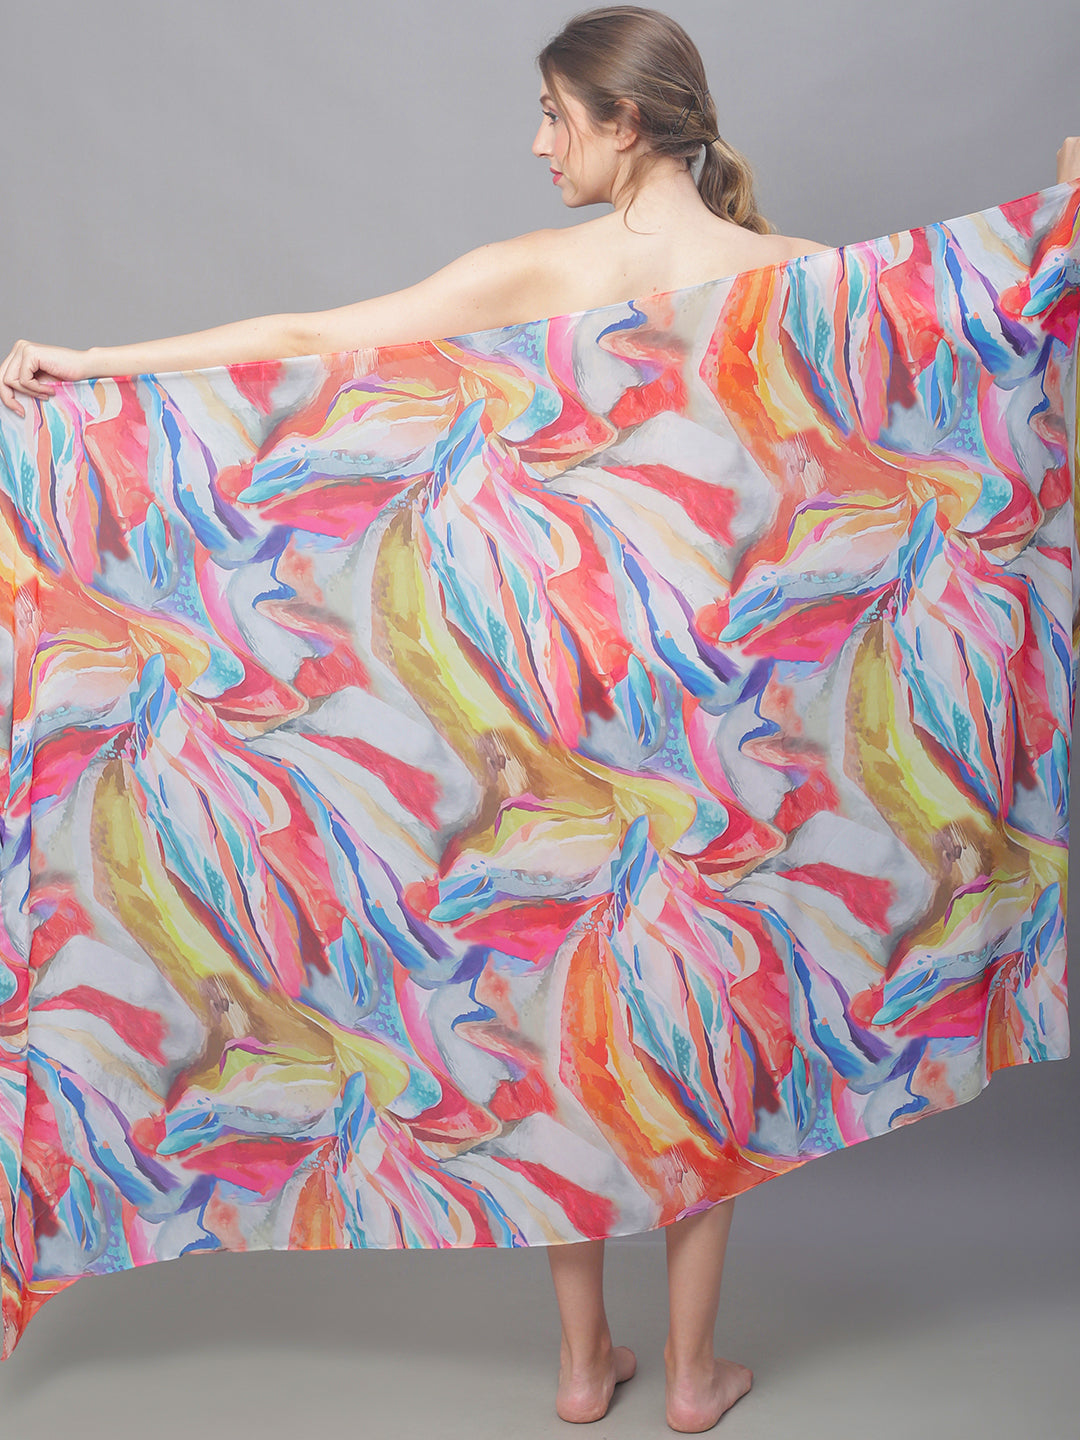 Multi Color Abstract Printed Georgette Coverup Beachwear Sarong For Woman Claura Designs Pvt. Ltd. Sarong Beachwear, Cover-up, Coverup, Free Size, georgette, multi color, Sarong, Swimwear